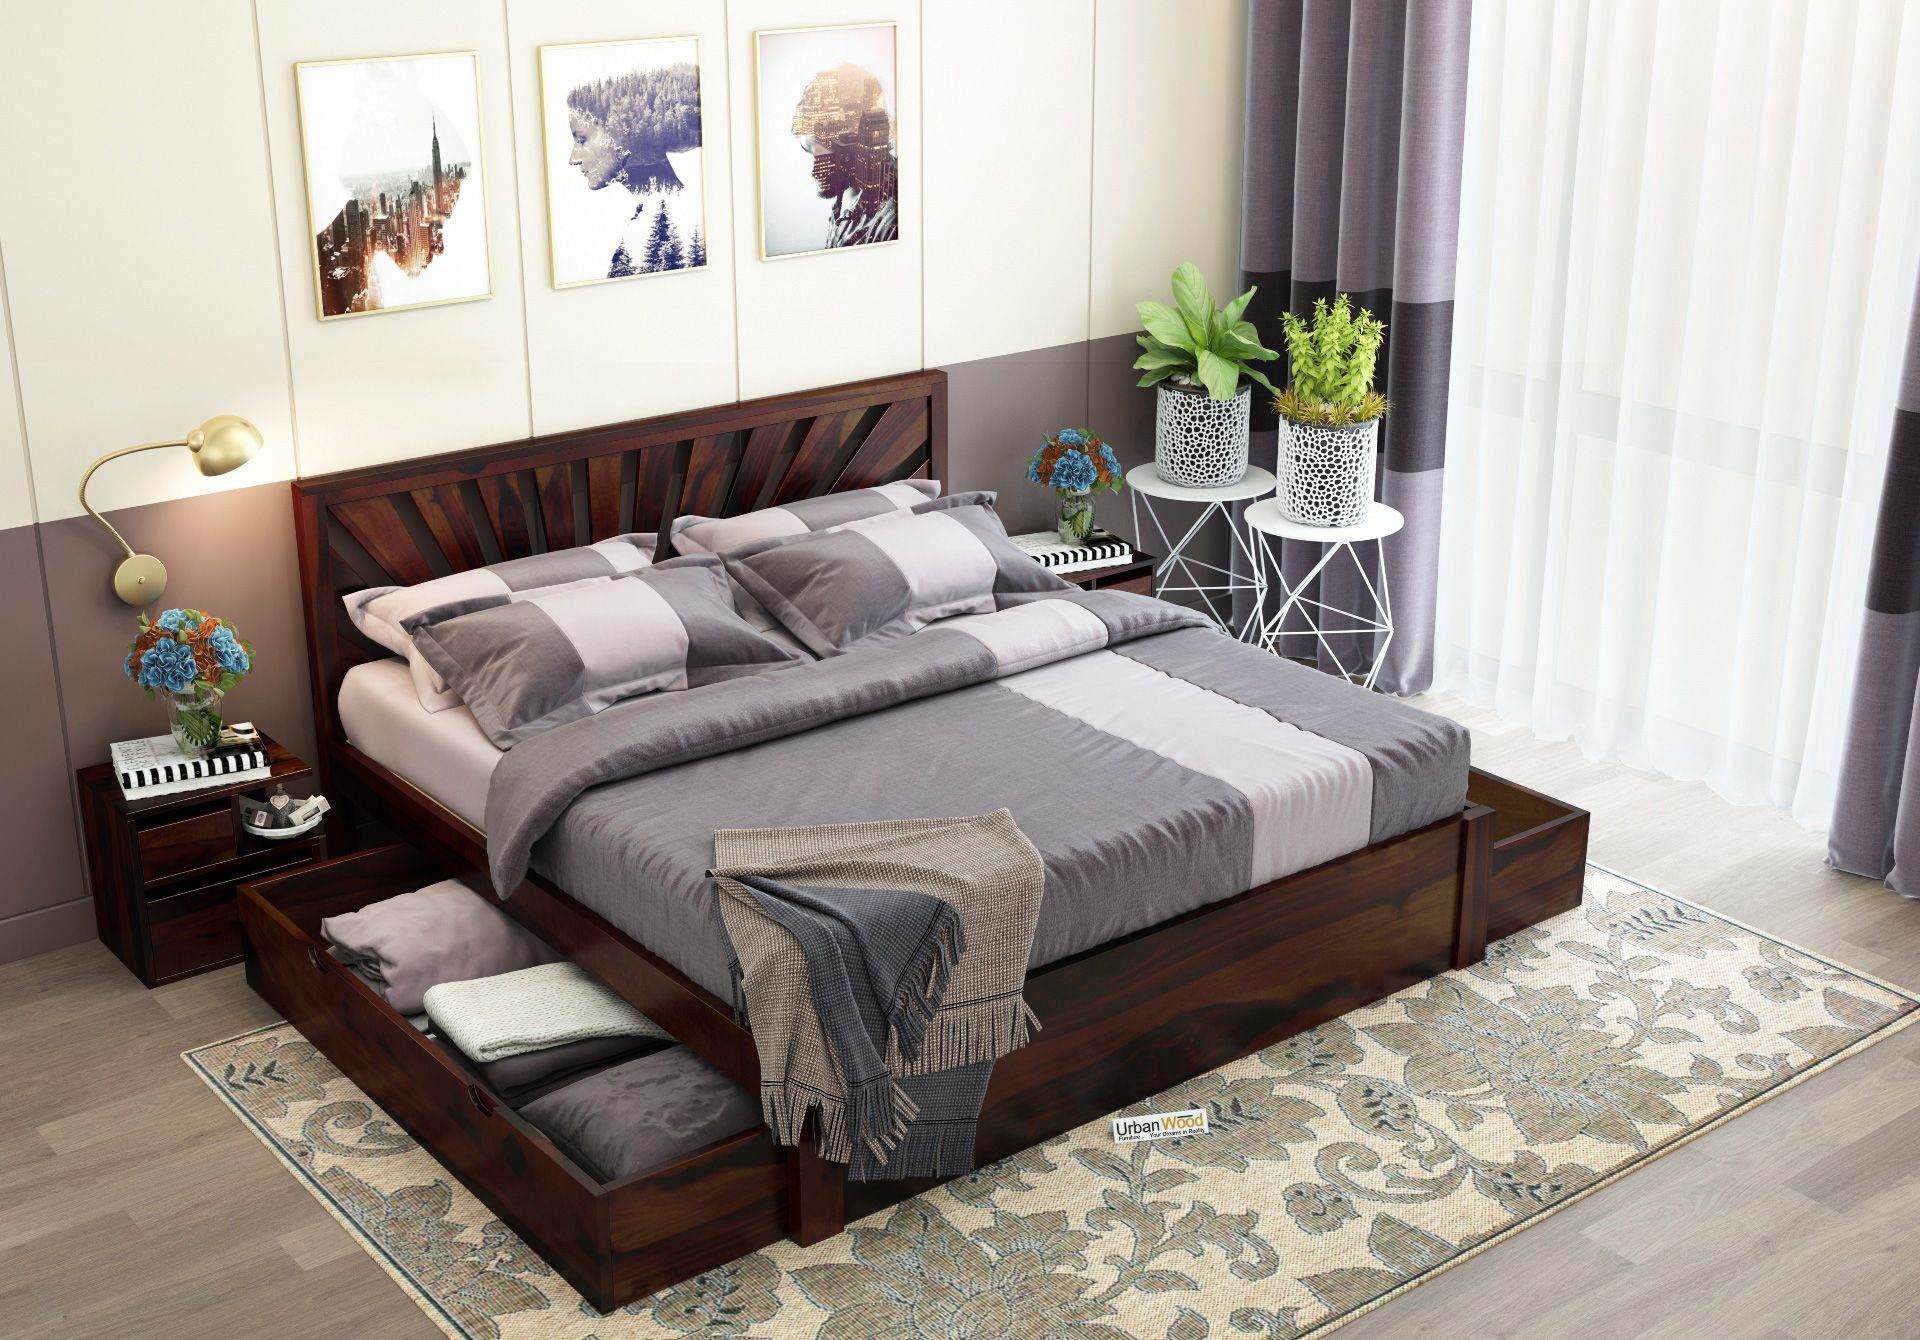 Jerry Wooden Bed With Drawer Storage Queen Size (Walnut Finish)